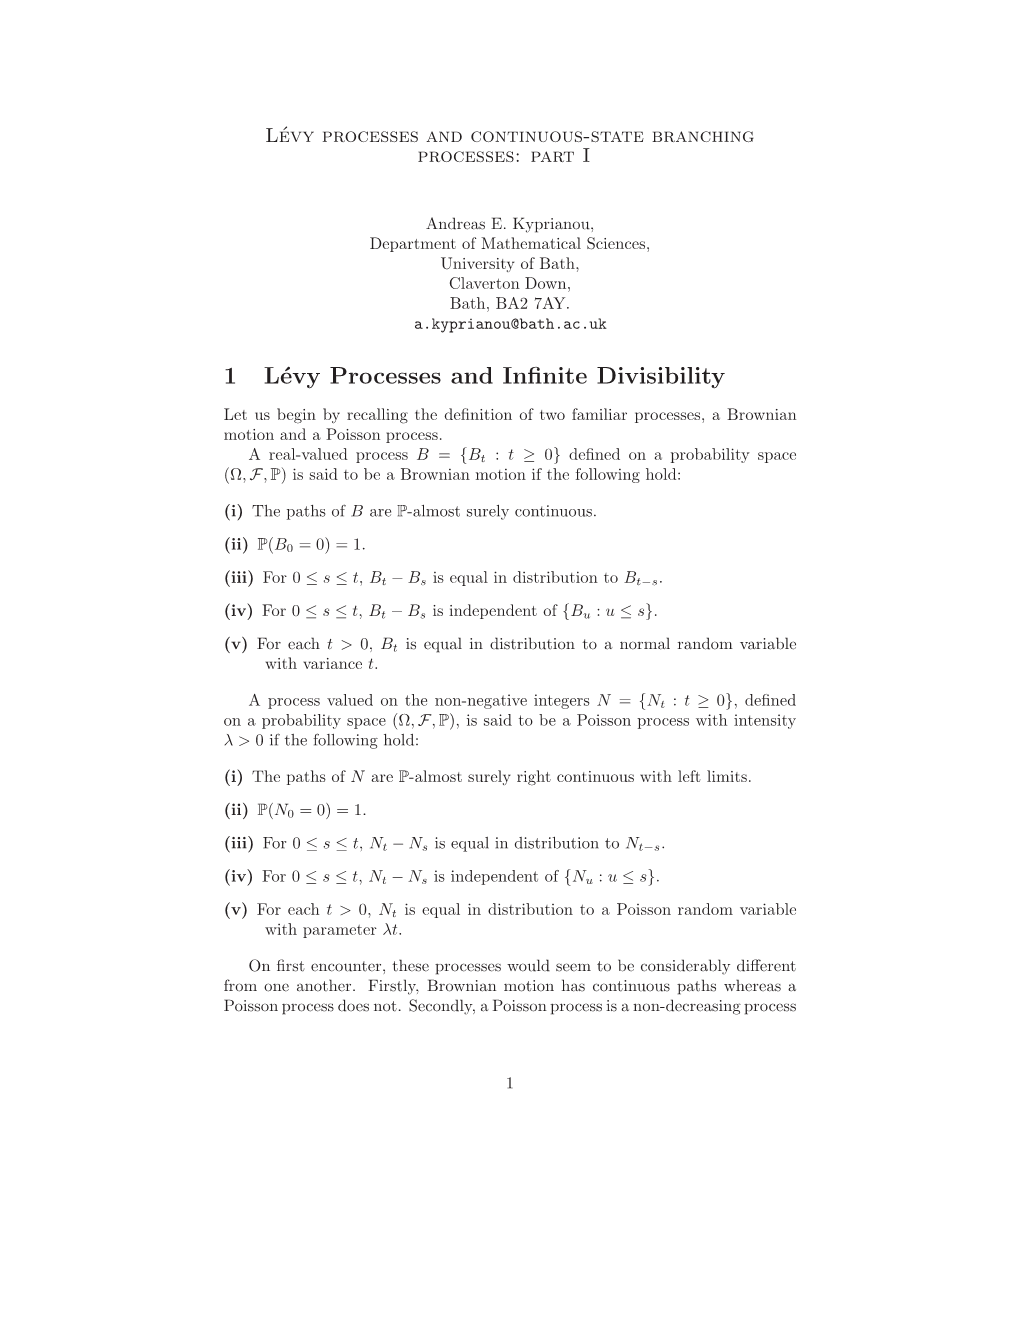 1 Lévy Processes and Infinite Divisibility